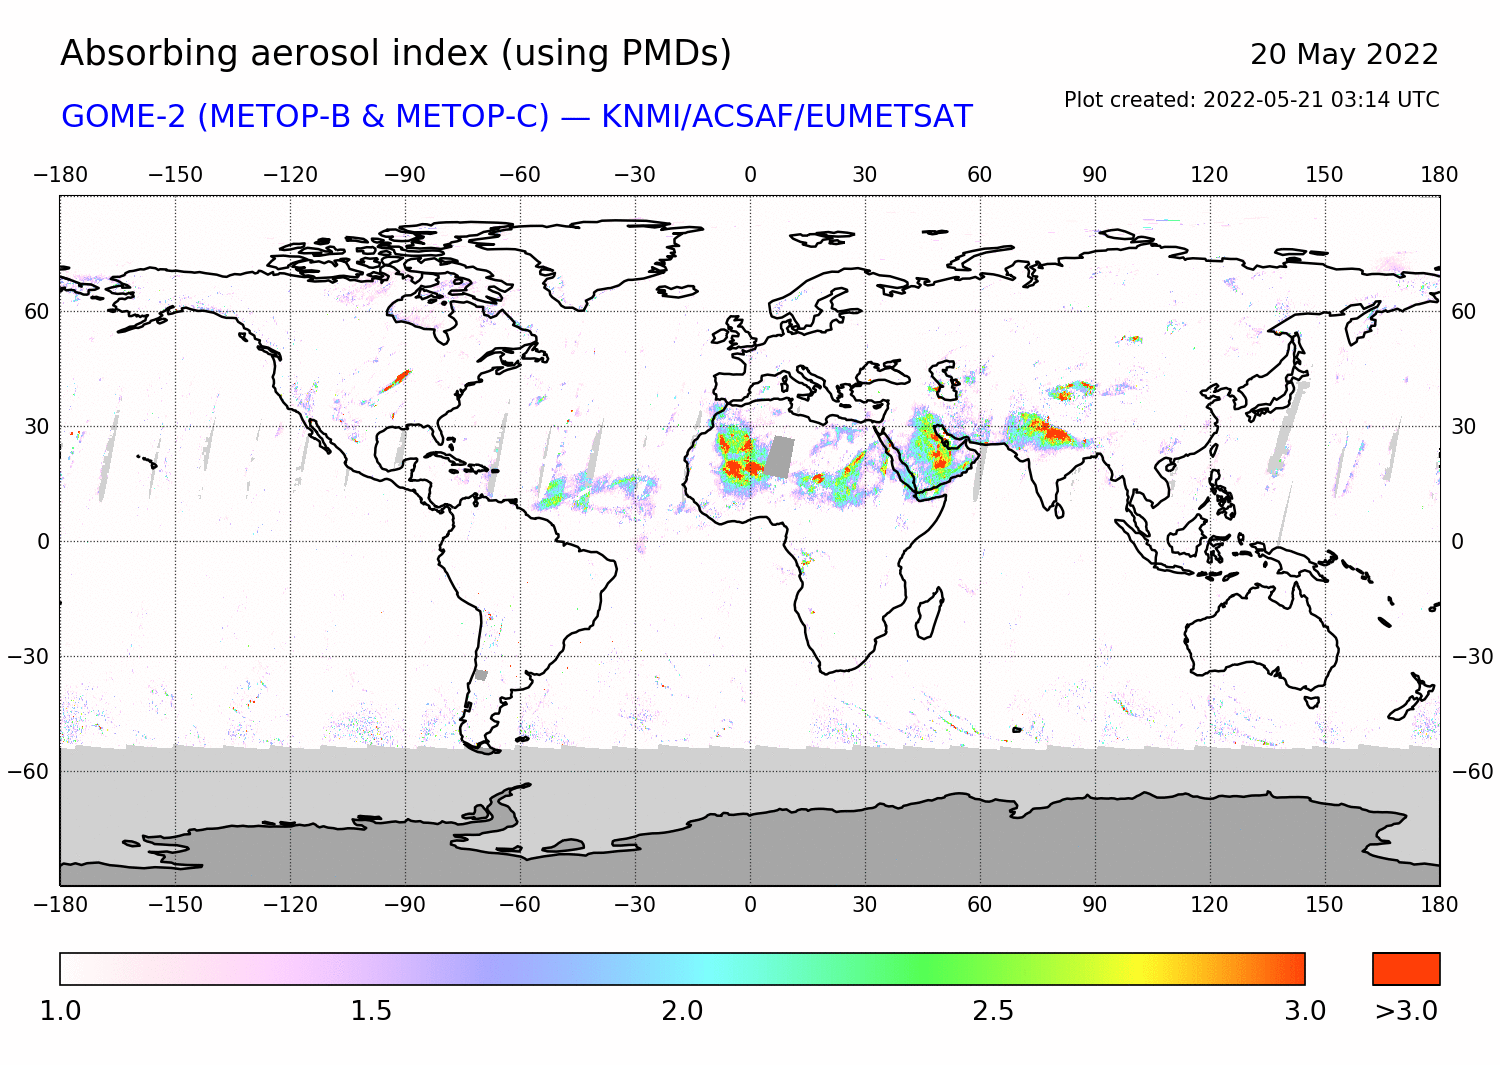 GOME-2 - Absorbing aerosol index of 20 May 2022